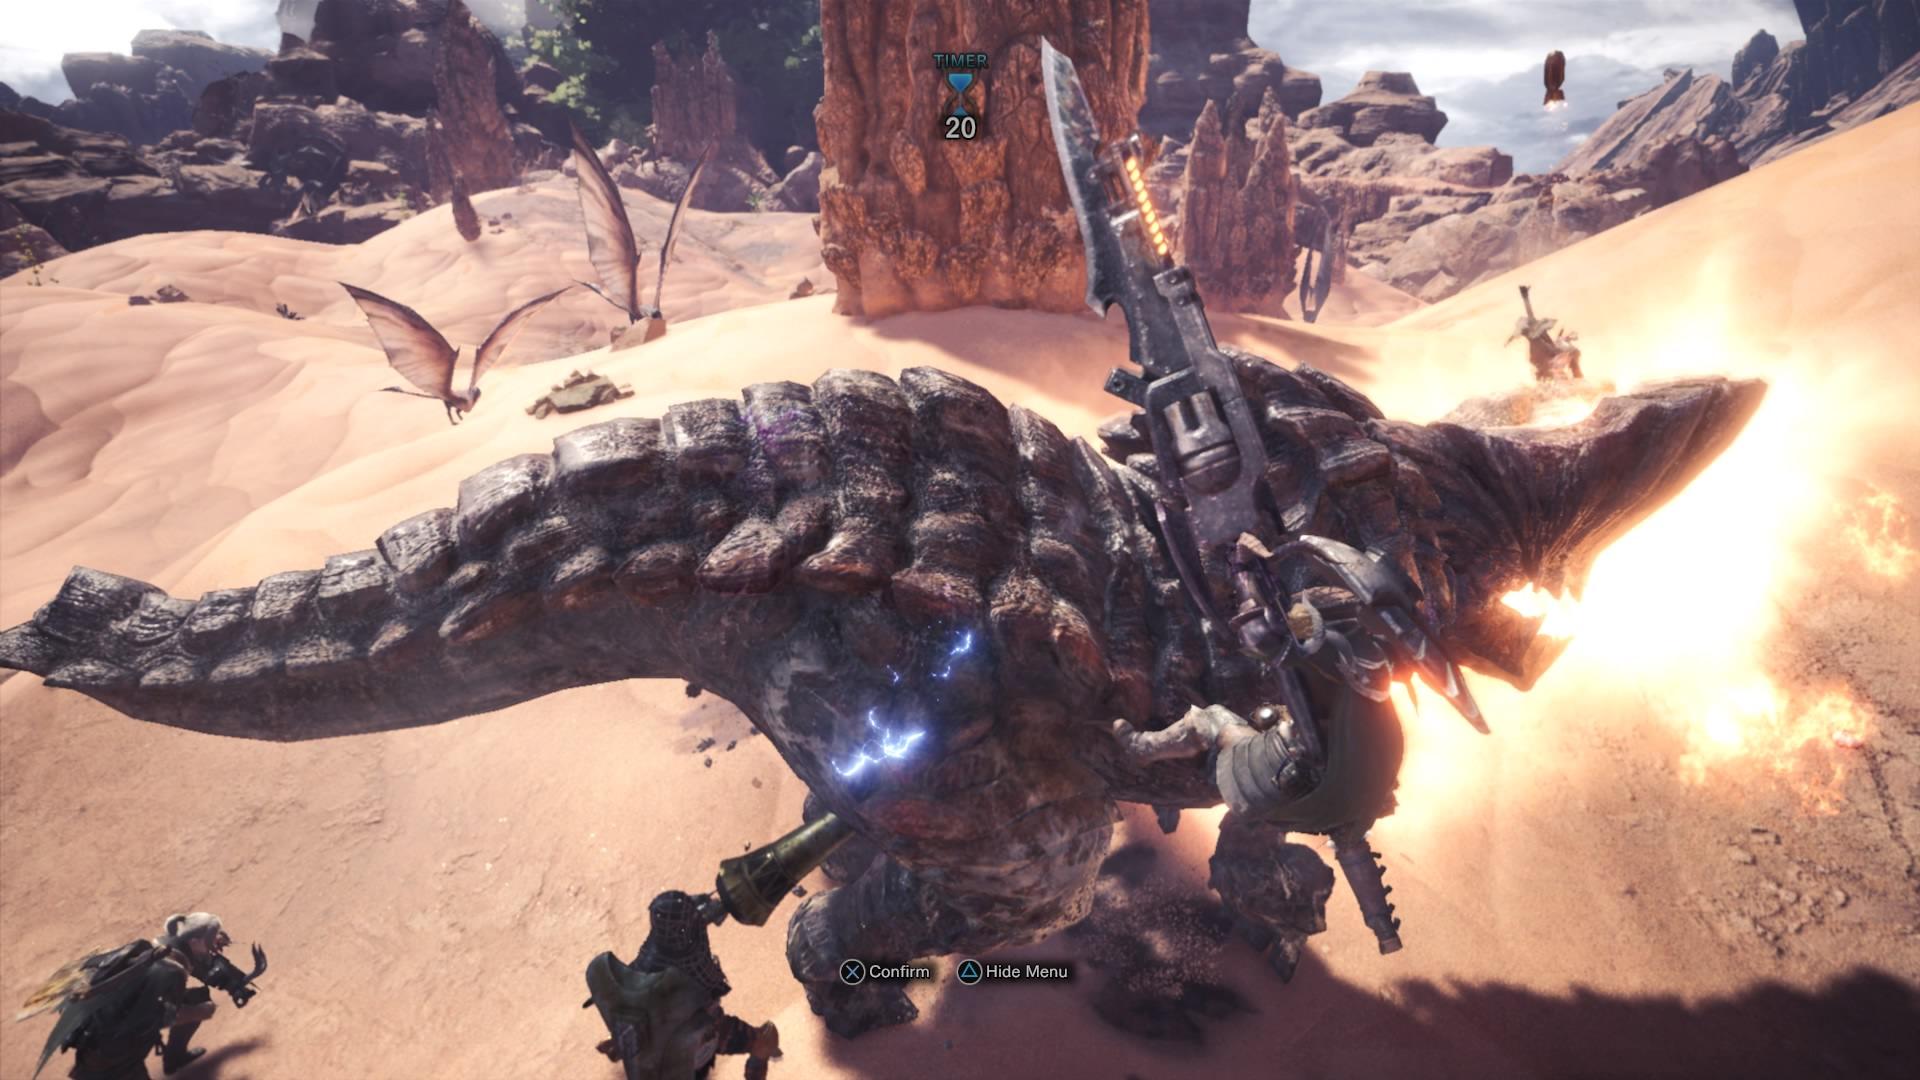 Here I Am Posing For An Epic Gunlance Screenshot While My